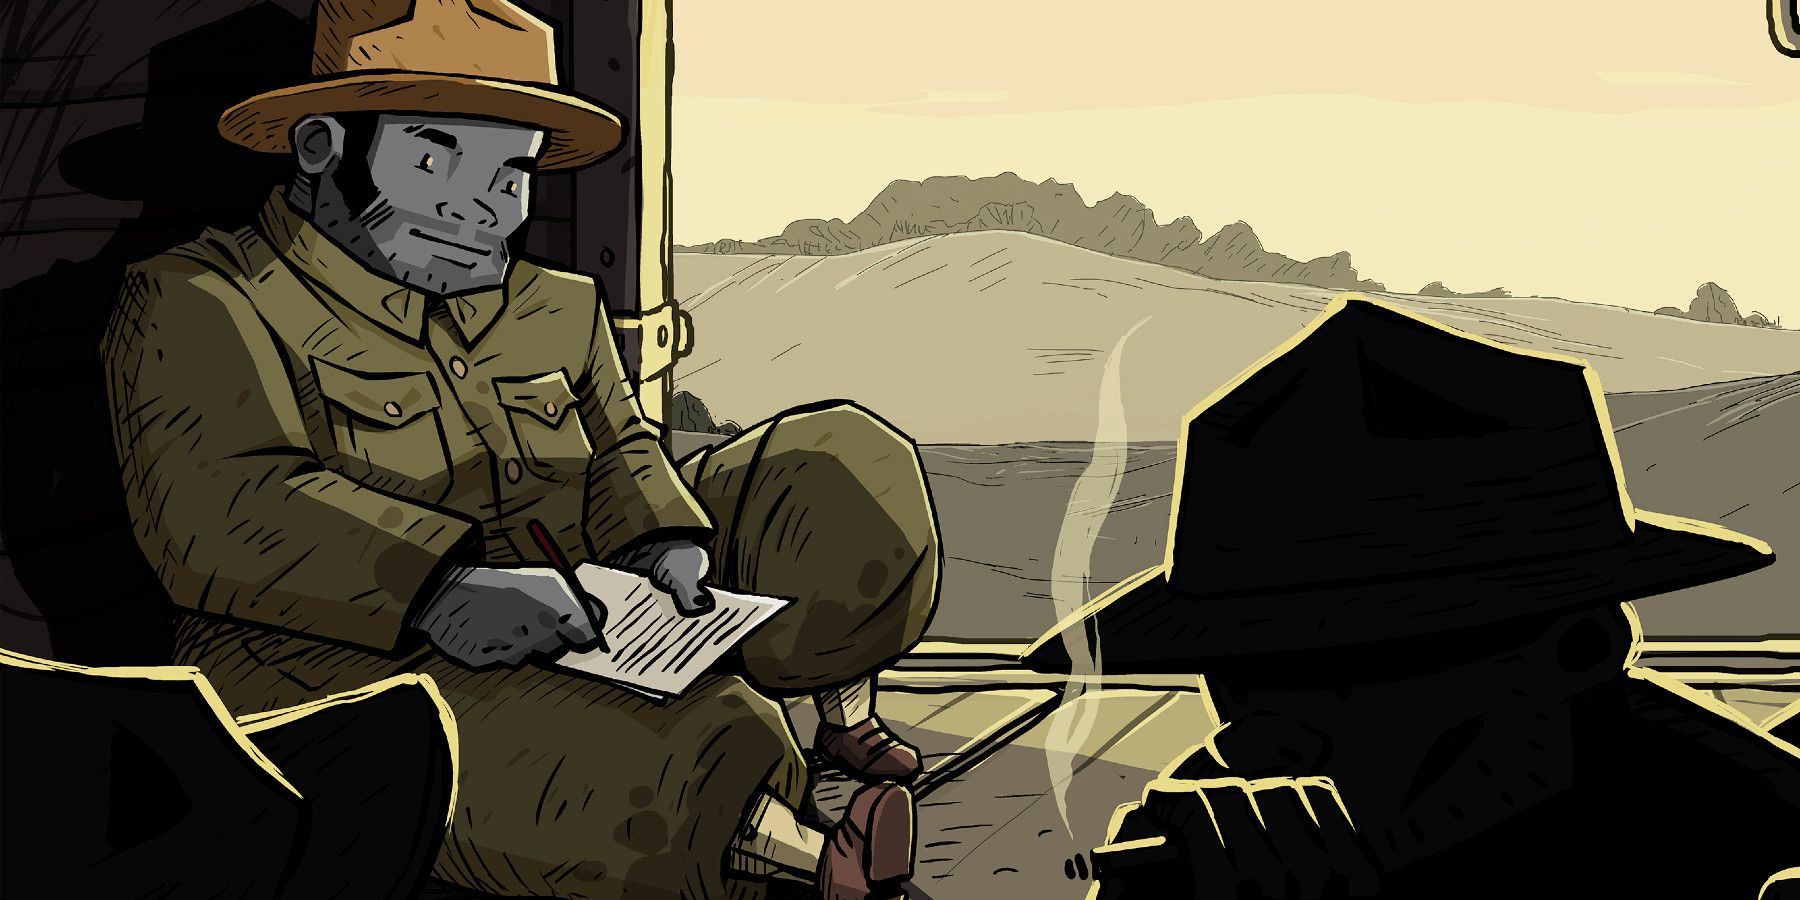 valiant hearts coming home game